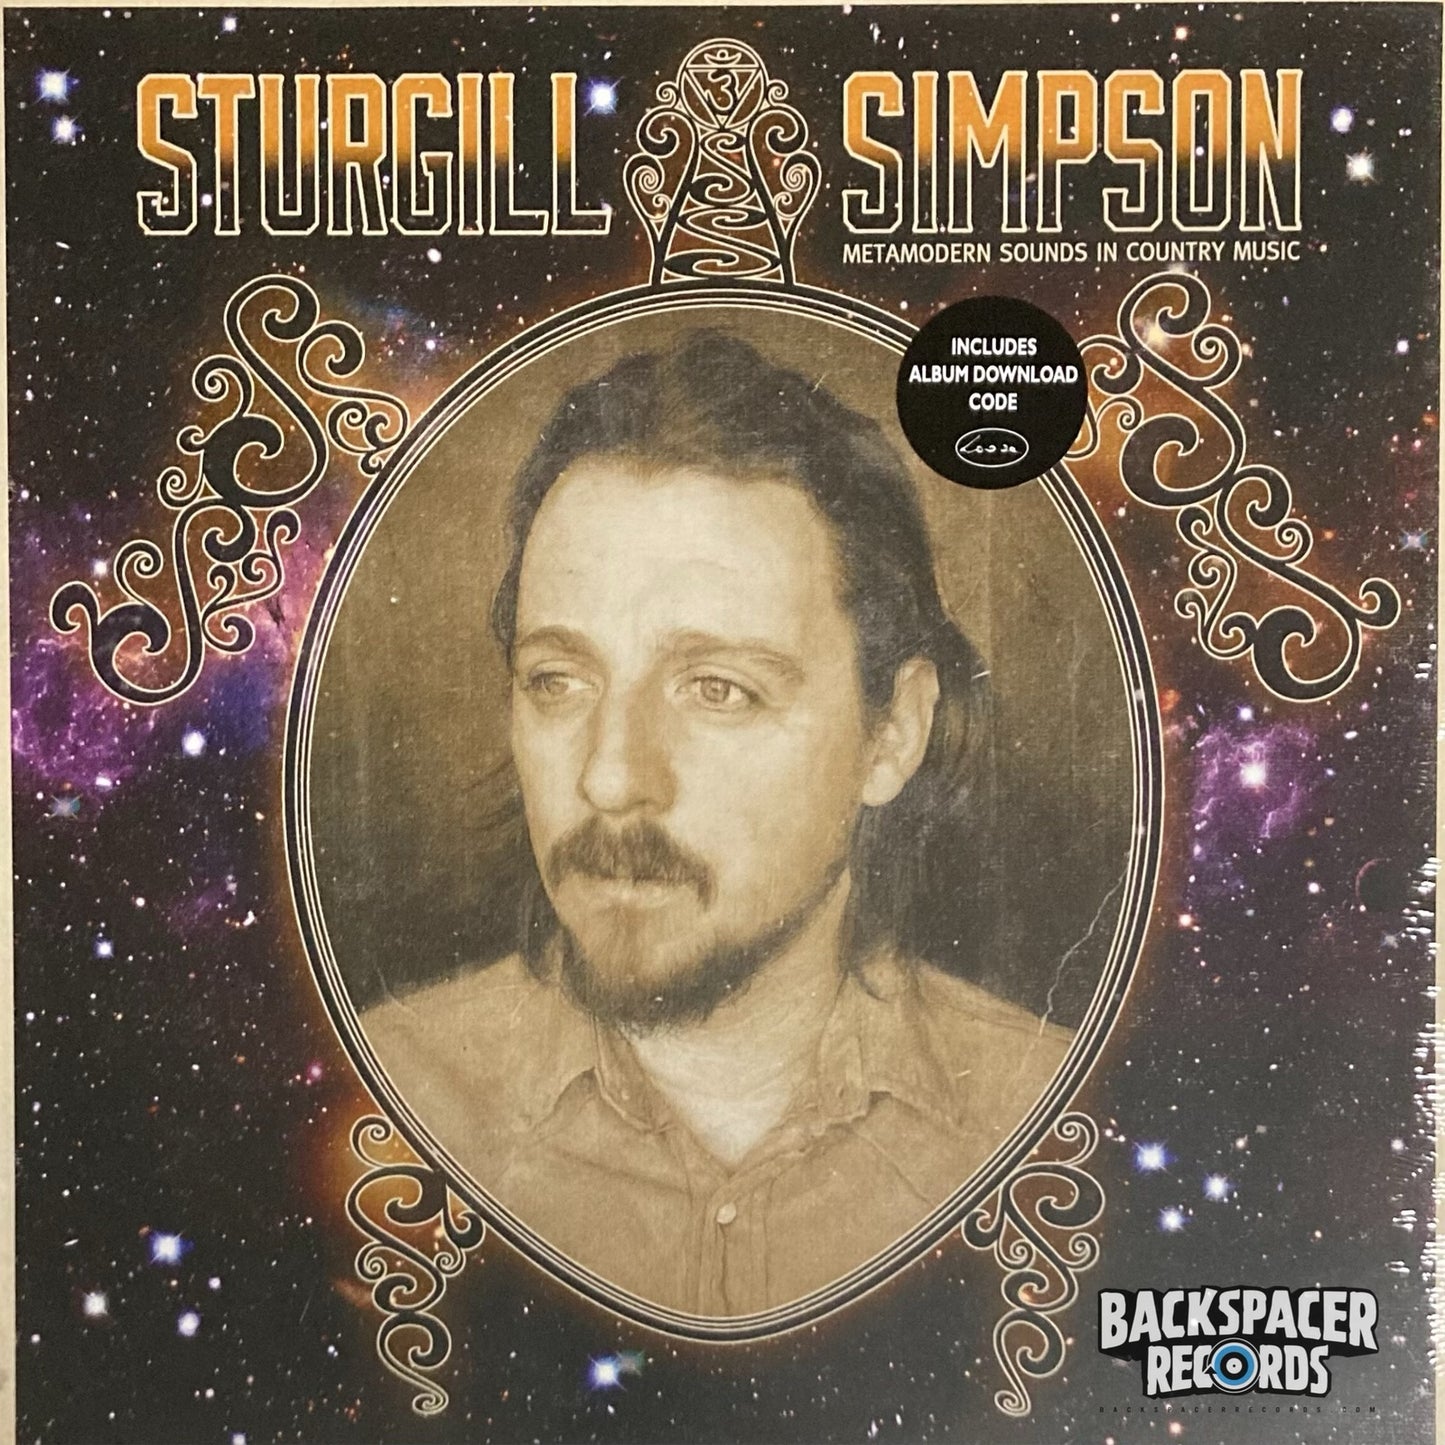 Sturgill Simpson - Metamodern Sounds In Country Music LP (Sealed)